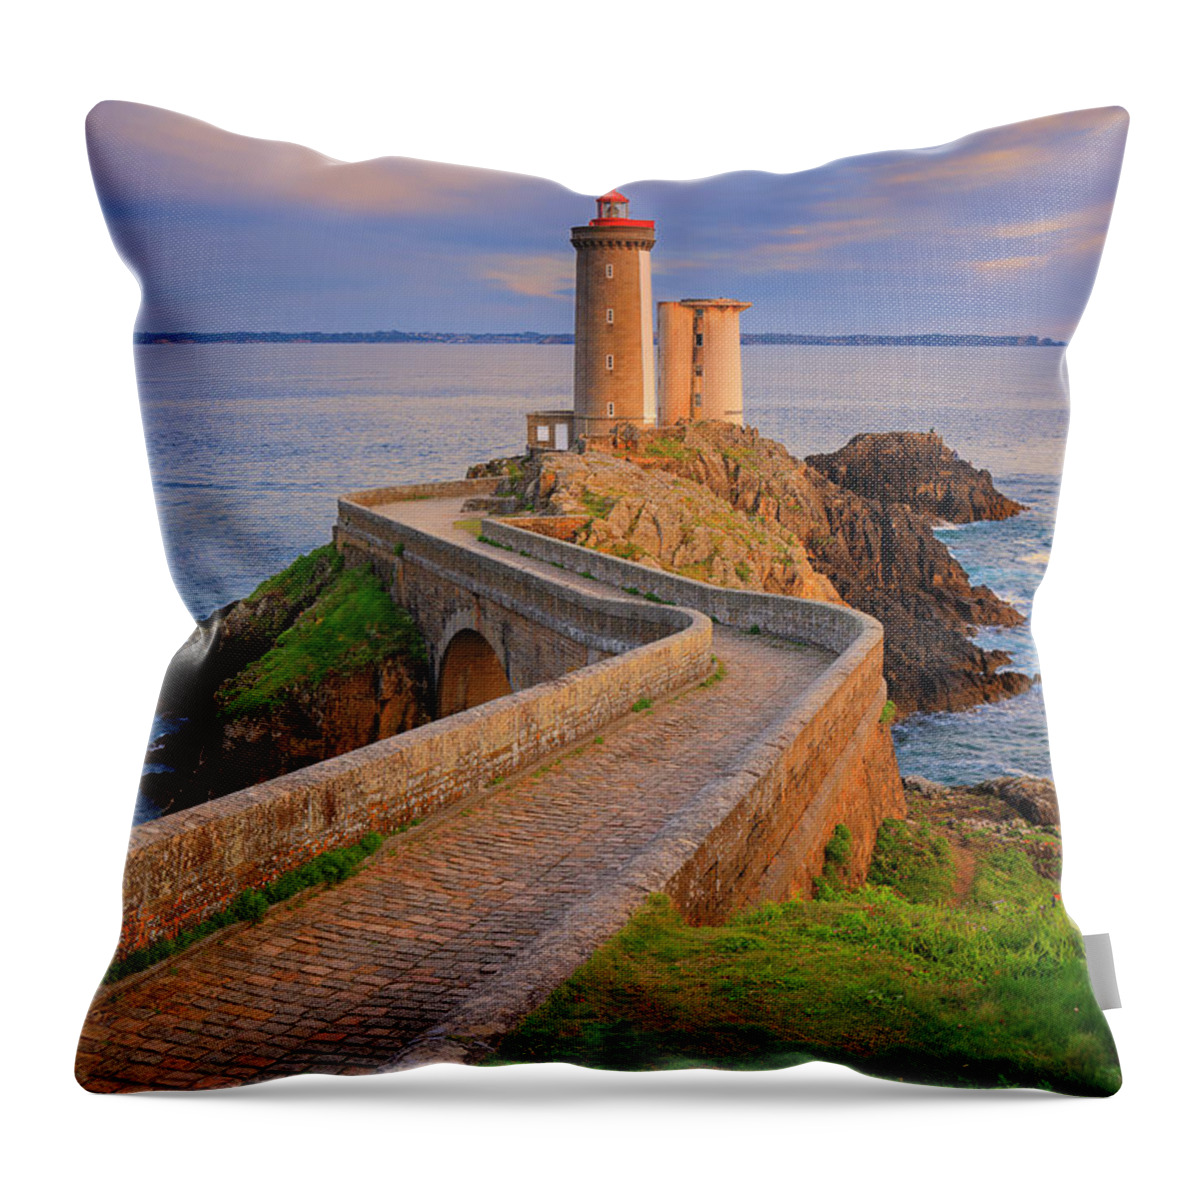 Estock Throw Pillow featuring the digital art France, Brittany, Atlantic Ocean, Finistere, Plouzane, View Of Petit Minou Lighthouse, Located Along The Brest Harbor, In The Warm Light Of Sunset #1 by Riccardo Spila